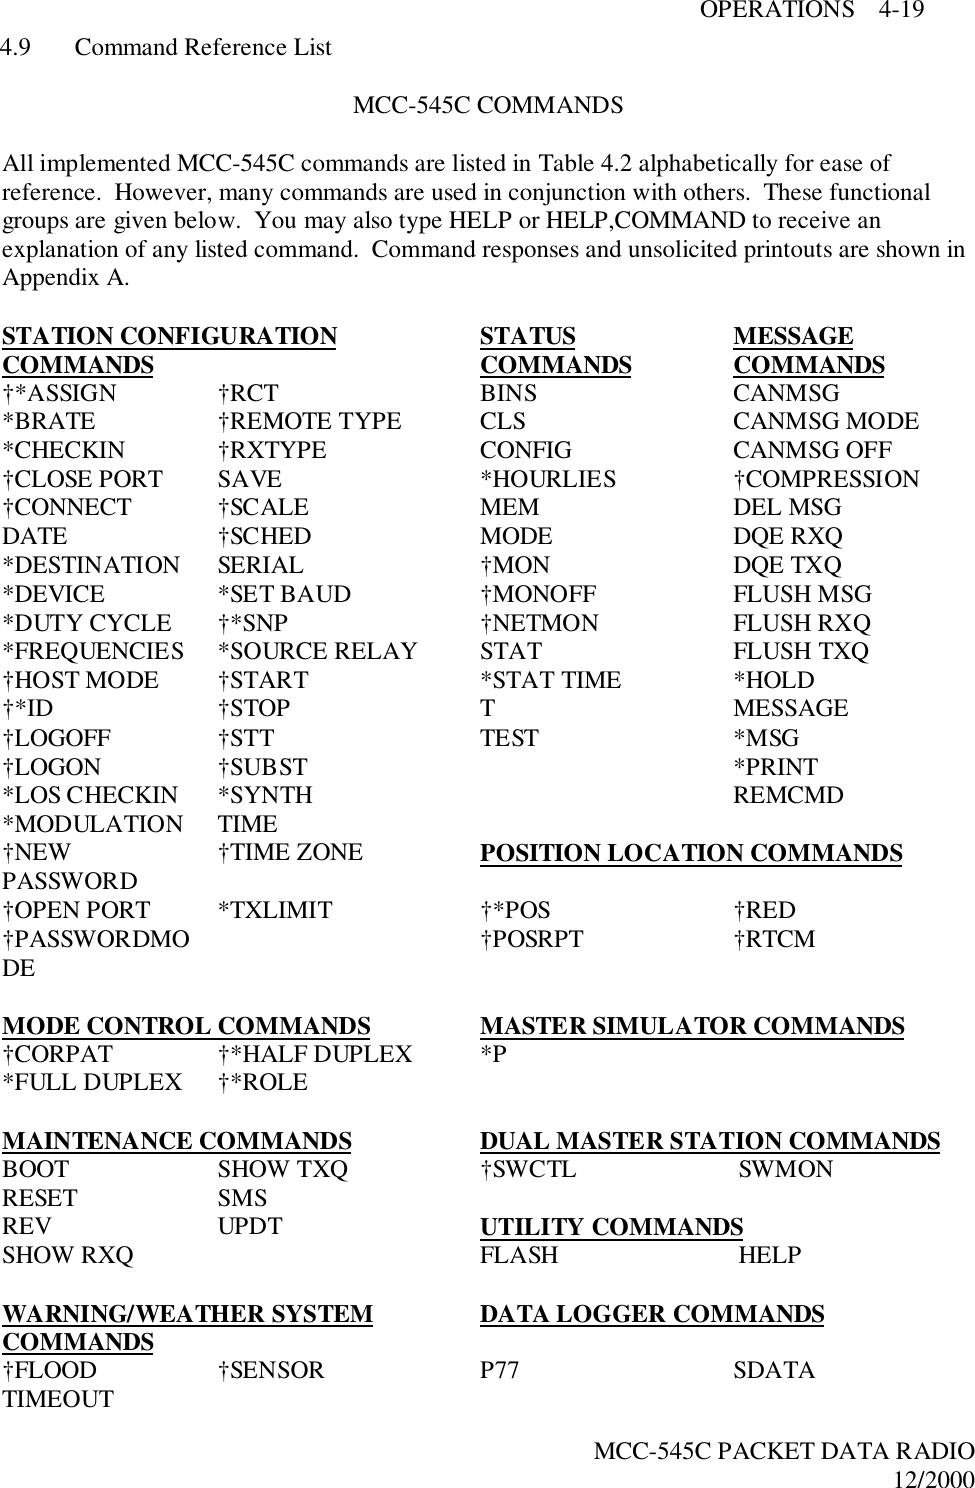 OPERATIONS    4-19MCC-545C PACKET DATA RADIO12/20004.9 Command Reference ListMCC-545C COMMANDSAll implemented MCC-545C commands are listed in Table 4.2 alphabetically for ease ofreference.  However, many commands are used in conjunction with others.  These functionalgroups are given below.  You may also type HELP or HELP,COMMAND to receive anexplanation of any listed command.  Command responses and unsolicited printouts are shown inAppendix A.STATION CONFIGURATIONCOMMANDS STATUSCOMMANDS MESSAGECOMMANDS†*ASSIGN †RCT BINS CANMSG*BRATE †REMOTE TYPE CLS CANMSG MODE*CHECKIN †RXTYPE CONFIG CANMSG OFF†CLOSE PORT SAVE *HOURLIES †COMPRESSION†CONNECT †SCALE MEM DEL MSGDATE †SCHED MODE DQE RXQ*DESTINATION SERIAL †MON DQE TXQ*DEVICE *SET BAUD †MONOFF FLUSH MSG*DUTY CYCLE †*SNP †NETMON FLUSH RXQ*FREQUENCIES *SOURCE RELAY STAT FLUSH TXQ†HOST MODE †START *STAT TIME *HOLD†*ID †STOP T MESSAGE†LOGOFF †STT TEST *MSG†LOGON †SUBST *PRINT*LOS CHECKIN *SYNTH REMCMD*MODULATION TIME†NEWPASSWORD †TIME ZONE POSITION LOCATION COMMANDS†OPEN PORT *TXLIMIT †*POS †RED†PASSWORDMODE †POSRPT †RTCMMODE CONTROL COMMANDS MASTER SIMULATOR COMMANDS†CORPAT †*HALF DUPLEX *P*FULL DUPLEX †*ROLEMAINTENANCE COMMANDS DUAL MASTER STATION COMMANDSBOOT SHOW TXQ †SWCTL SWMONRESET SMSREV UPDT UTILITY COMMANDSSHOW RXQ FLASH HELPWARNING/WEATHER SYSTEMCOMMANDS DATA LOGGER COMMANDS†FLOODTIMEOUT †SENSOR P77 SDATA